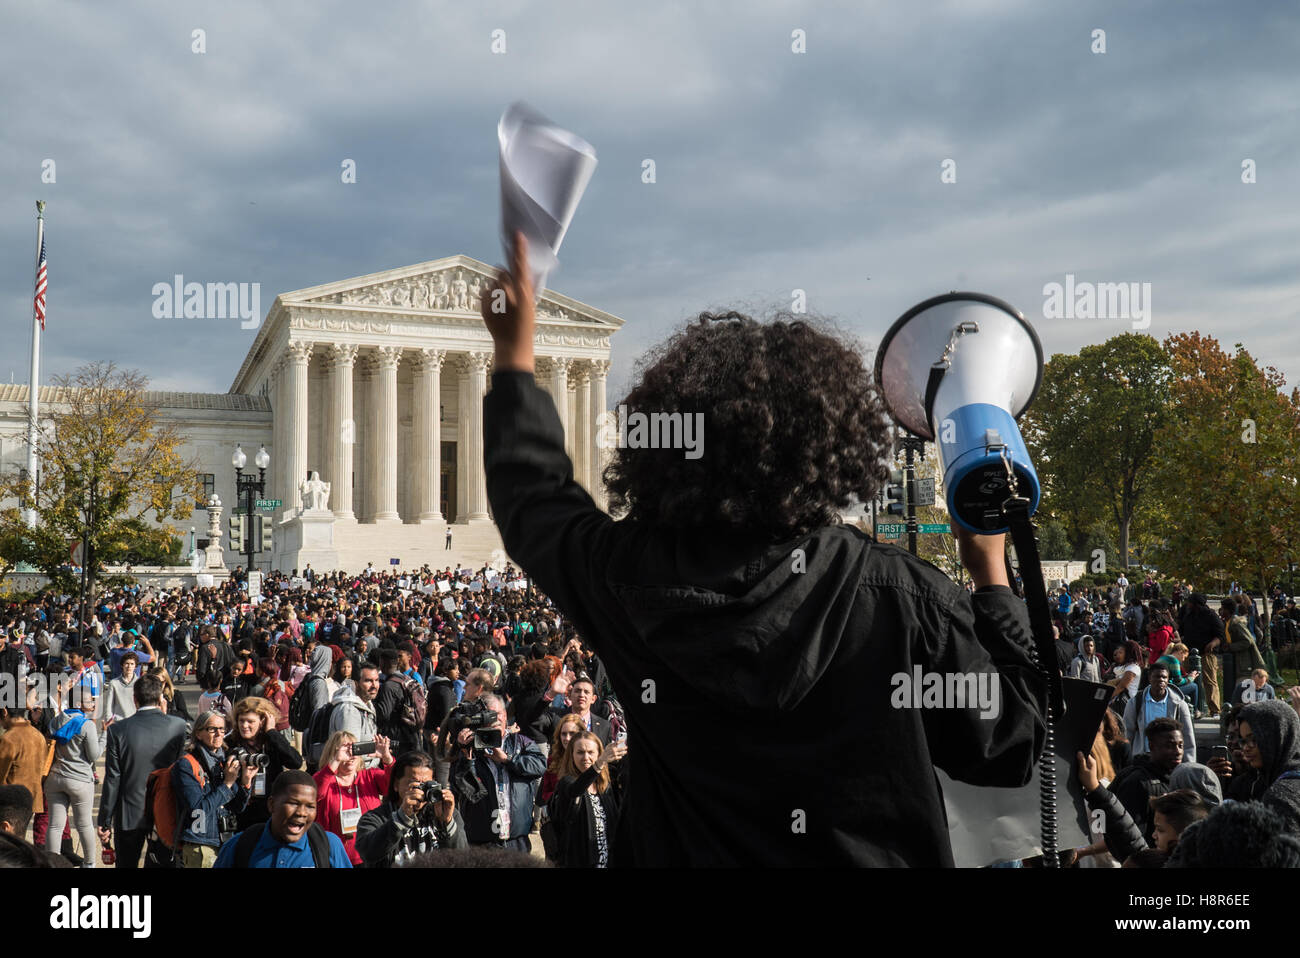 Washington DС, USA. 15th November, 2016. The students Anti Trump rally in Washington DС. A student stands with megaphone in fronf of the meeting students and the Supreme Court of the United States. Credit:  Andrey Borodulin/Alamy Live News Stock Photo